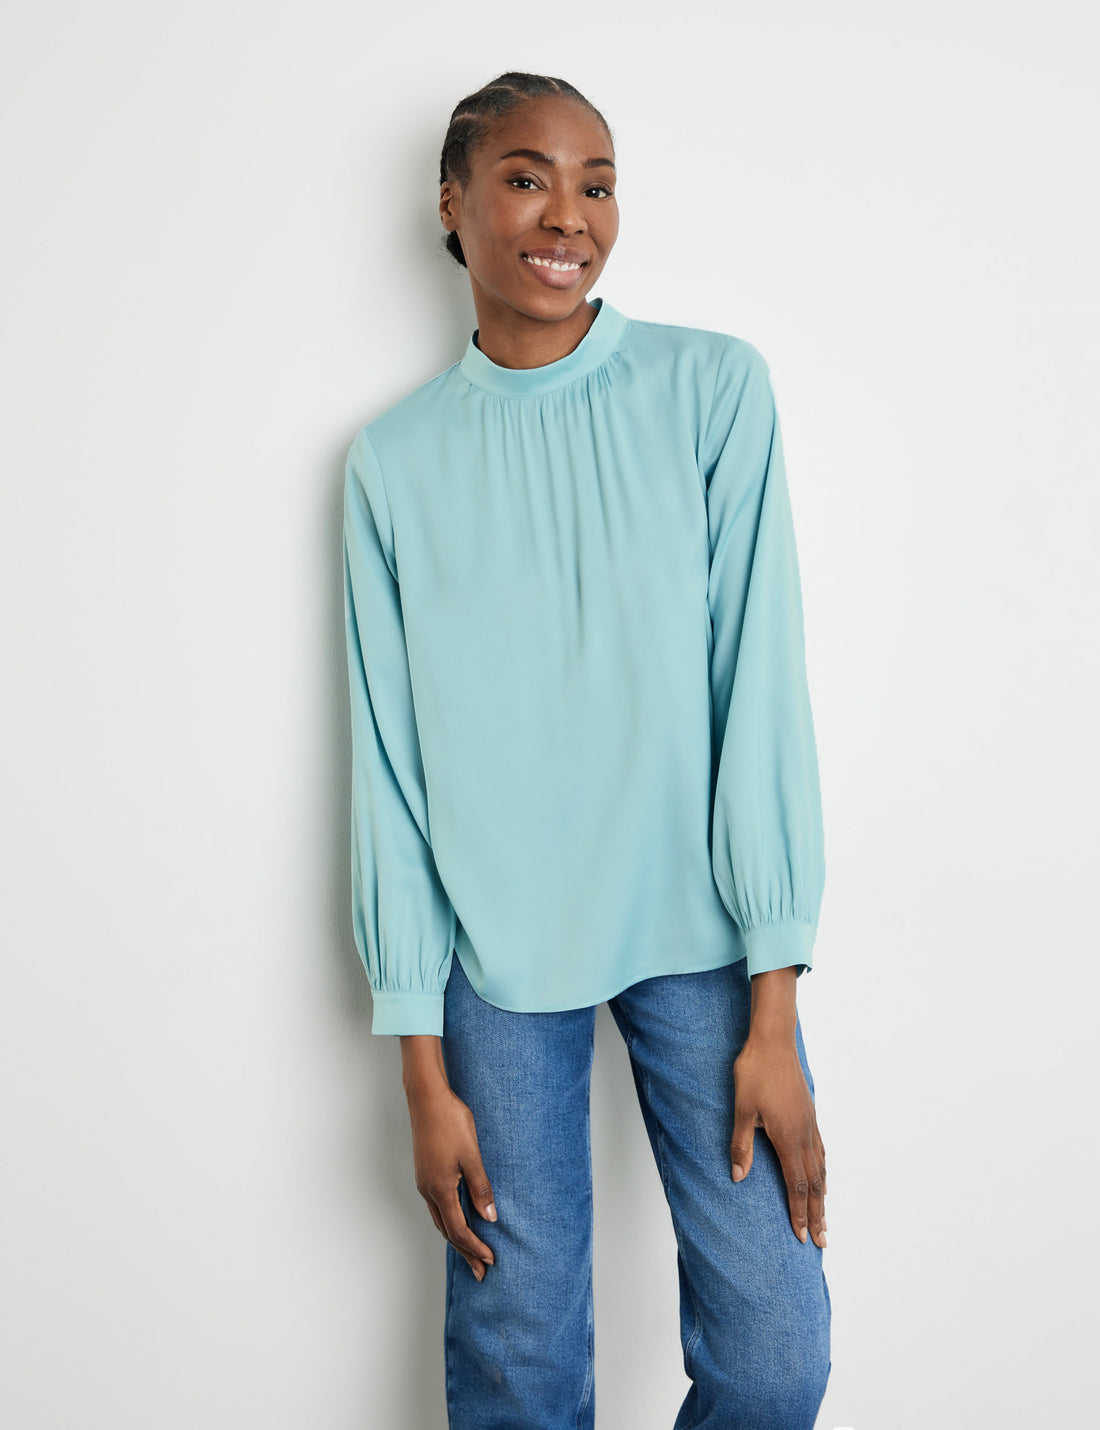 Flowing Blouse With A Stand-Up Collar_360067-31460_80938_01